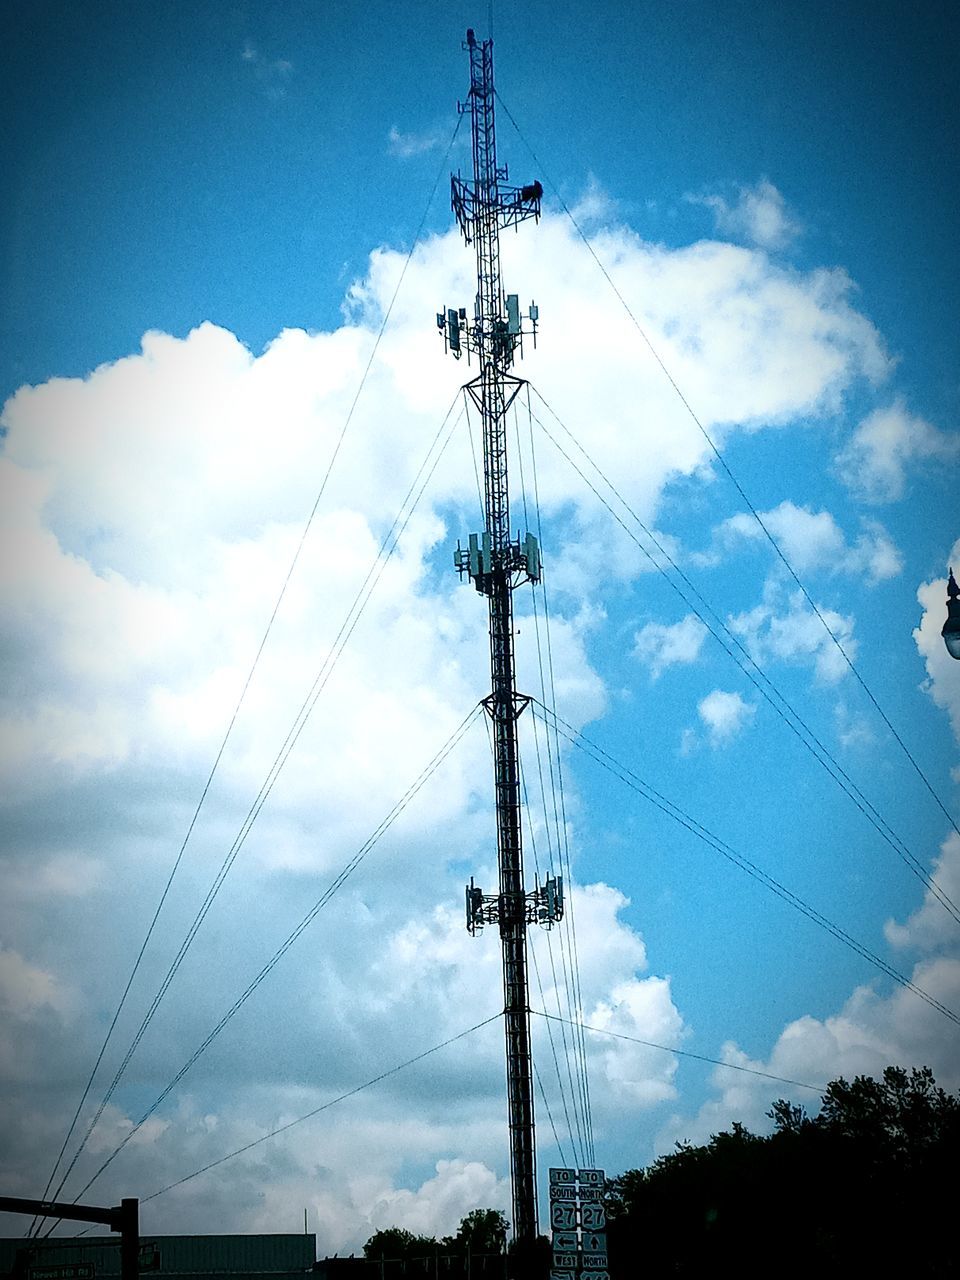 Blue Sky and the tower lines are so clear. #summer #sky #clouds  #beautifulnature #photography #life #naturelove #skylovers #beautiful #landscape #nature #photography #EyeEmNewHere #EyeEm Nature Lover #MobilePhotography #JustMe #likeforlike #likemyphoto #qlikemyphotos #like4like #likemypic #likeback #ilikeback #10likes #50likes #100likes #20likes #likere #FollowMe